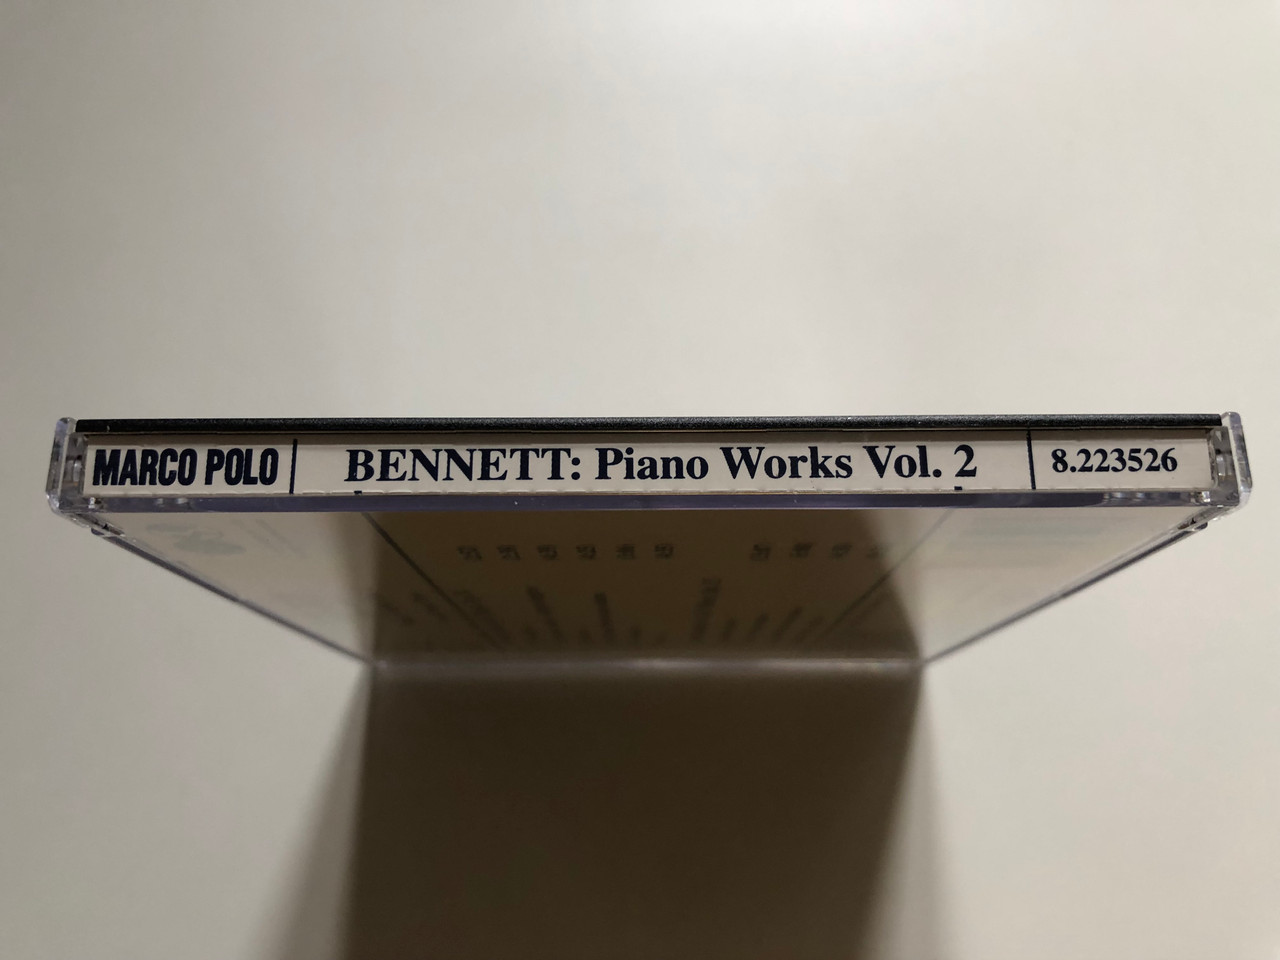 https://cdn10.bigcommerce.com/s-62bdpkt7pb/products/0/images/307017/William_Sterndale_Bennett_-_Piano_Works_Vol._2_Suite_De_Pices_Op._24_Piano_Sonata_No._1_Op._13_-_Ilona_Prunyi_piano_Marco_Polo_Audio_CD_1993_Stereo_8_3__32957.1698439097.1280.1280.JPG?c=2